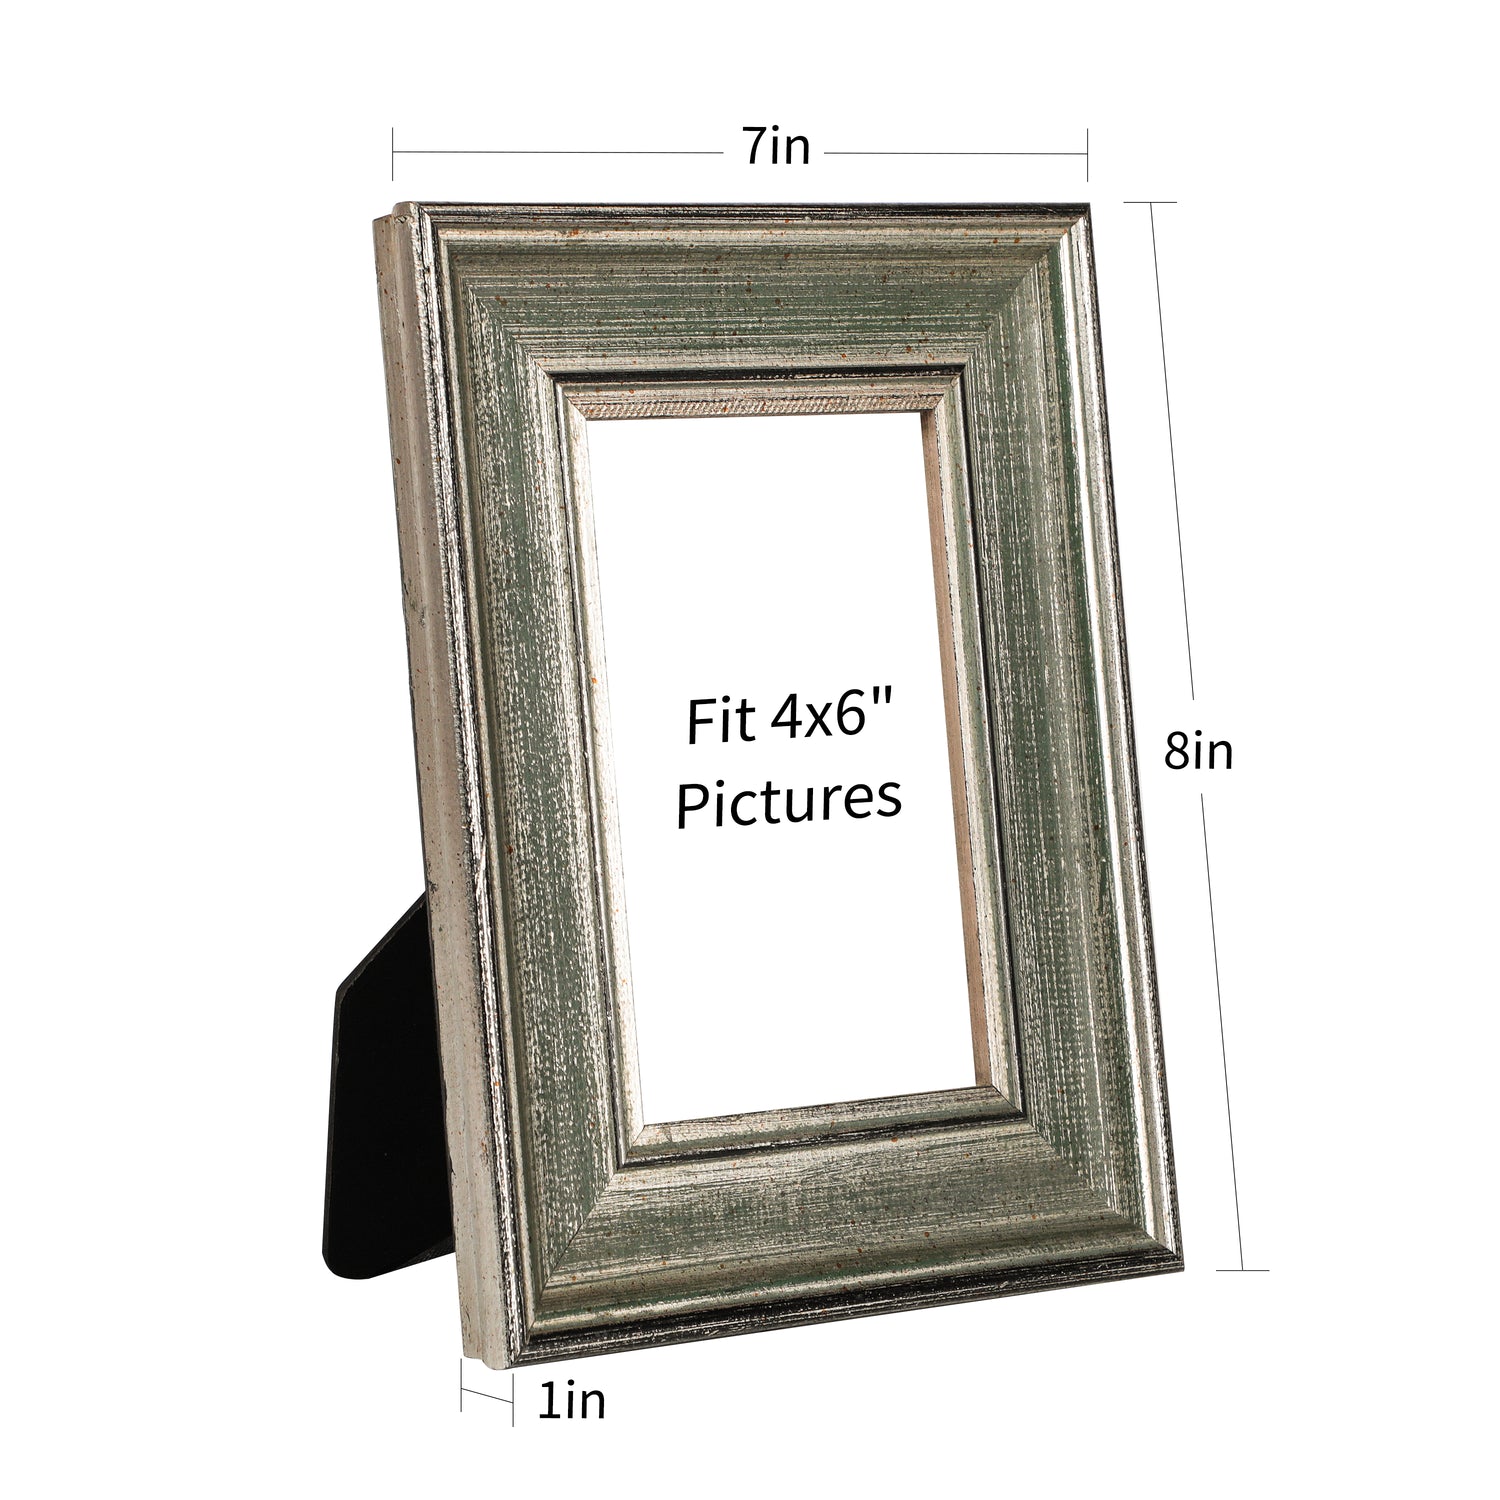 Brown PECAN SLANT Distressed 4x6 Wood frame by Pinnacle® - Picture Frames,  Photo Albums, Personalized and Engraved Digital Photo Gifts - SendAFrame